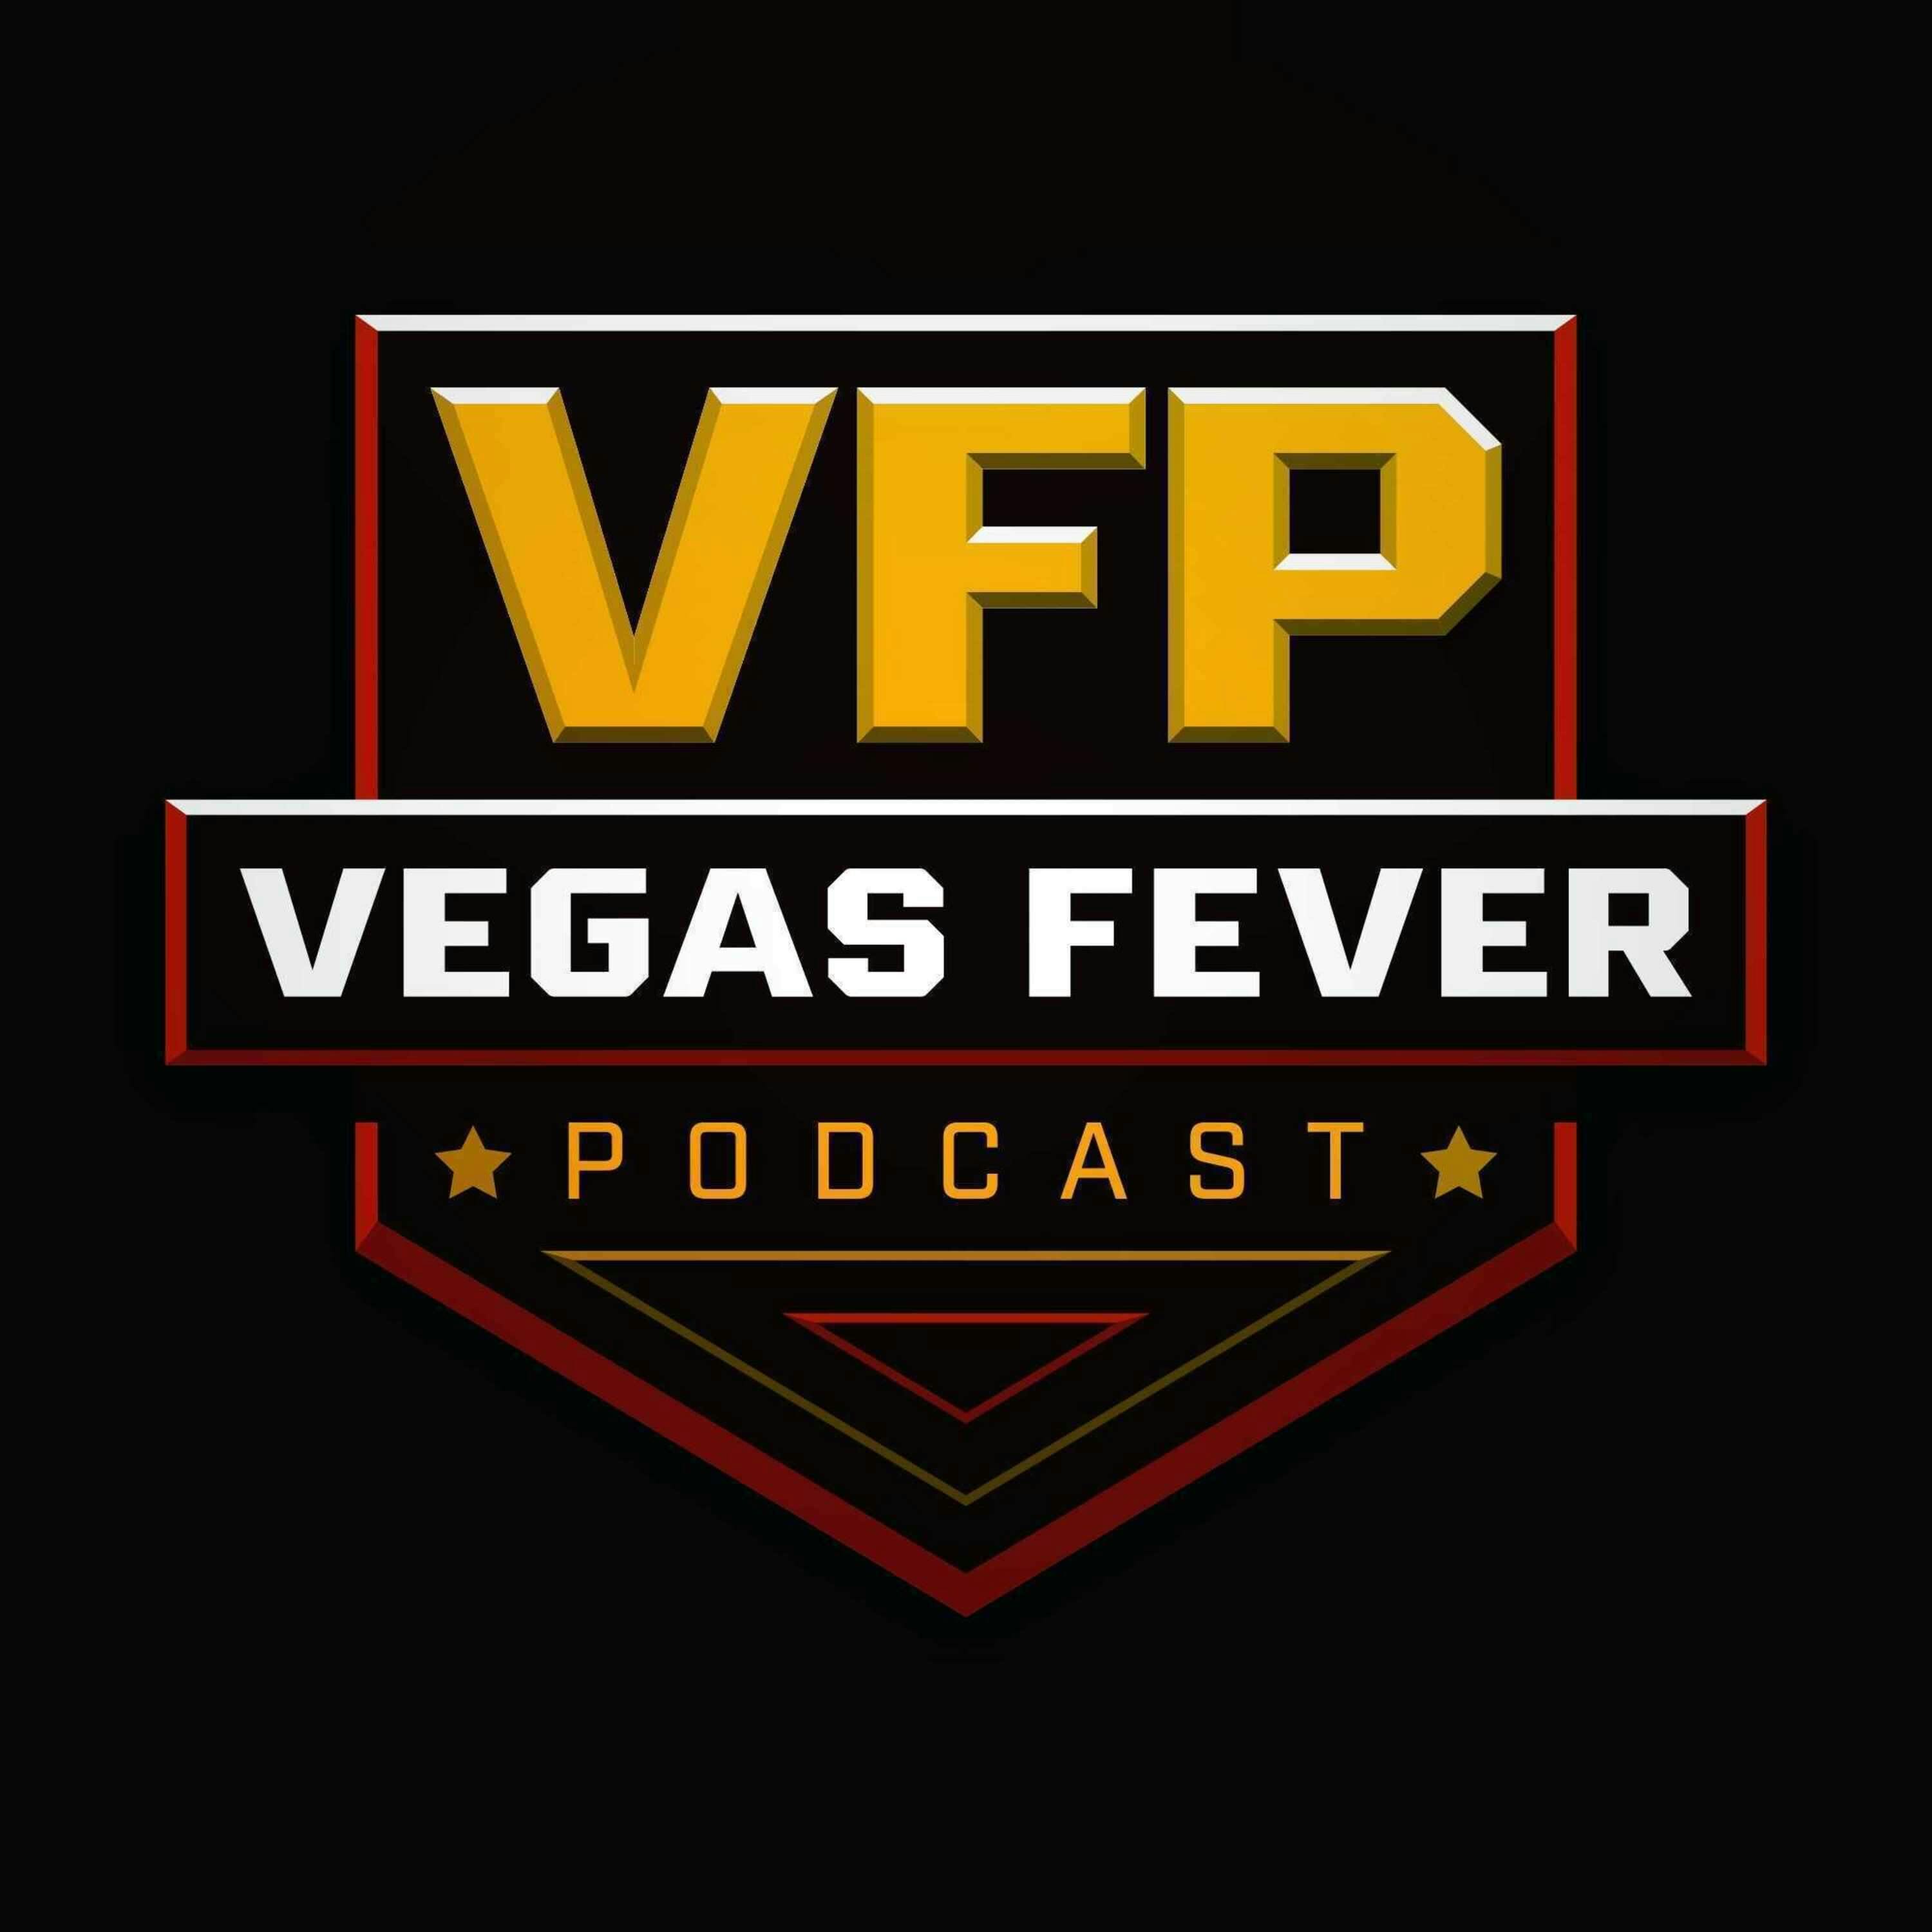 Episode 17- UNLV’s Big 12 additions continue, VGK has its ups and downs. New Arena on the strip?